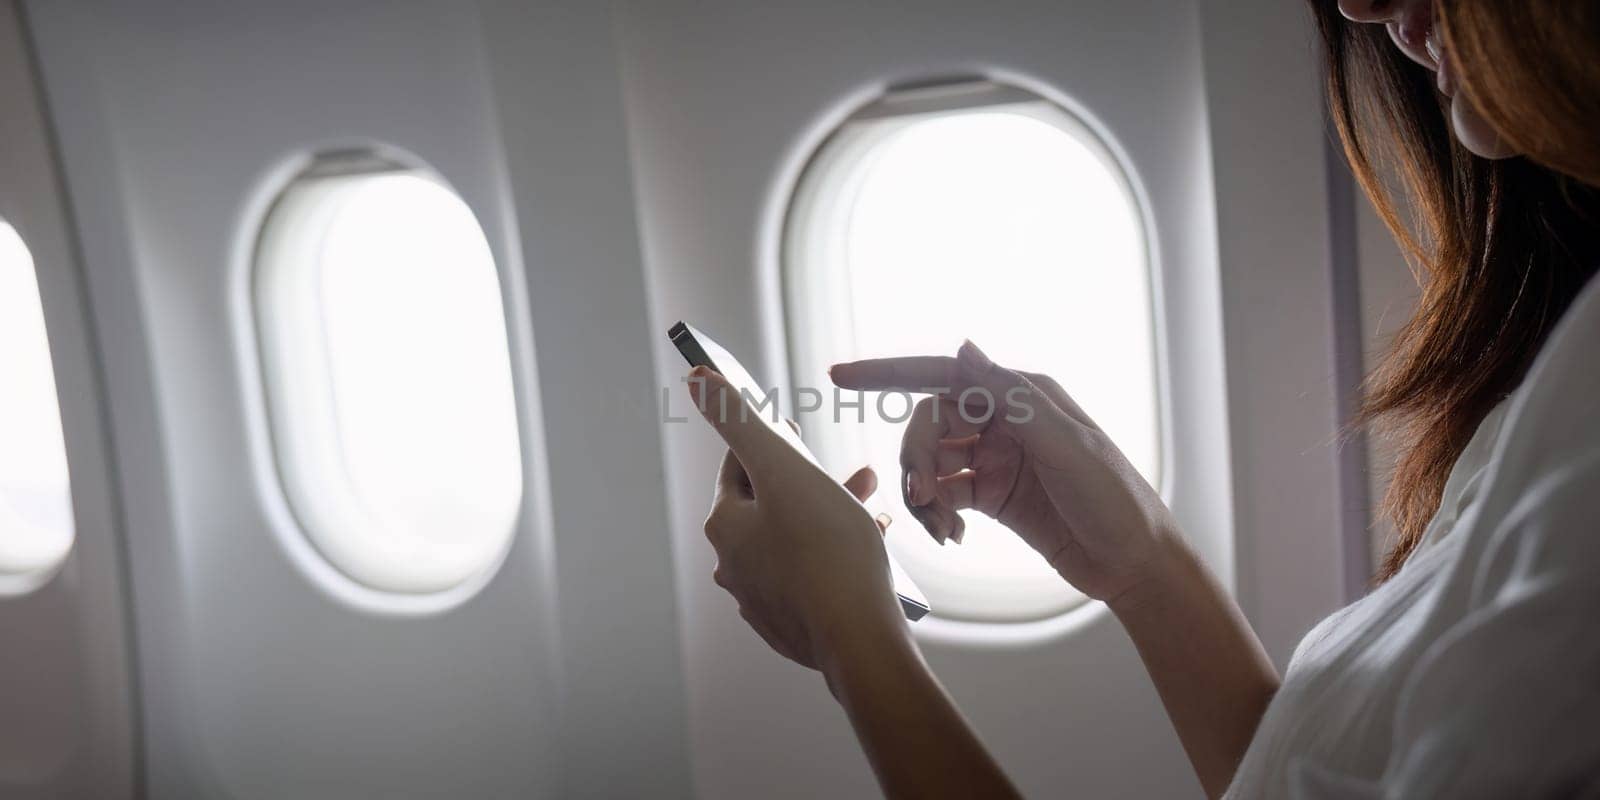 A passenger using a smartphone on an airplane, showcasing modern technology and connectivity during flight travel.